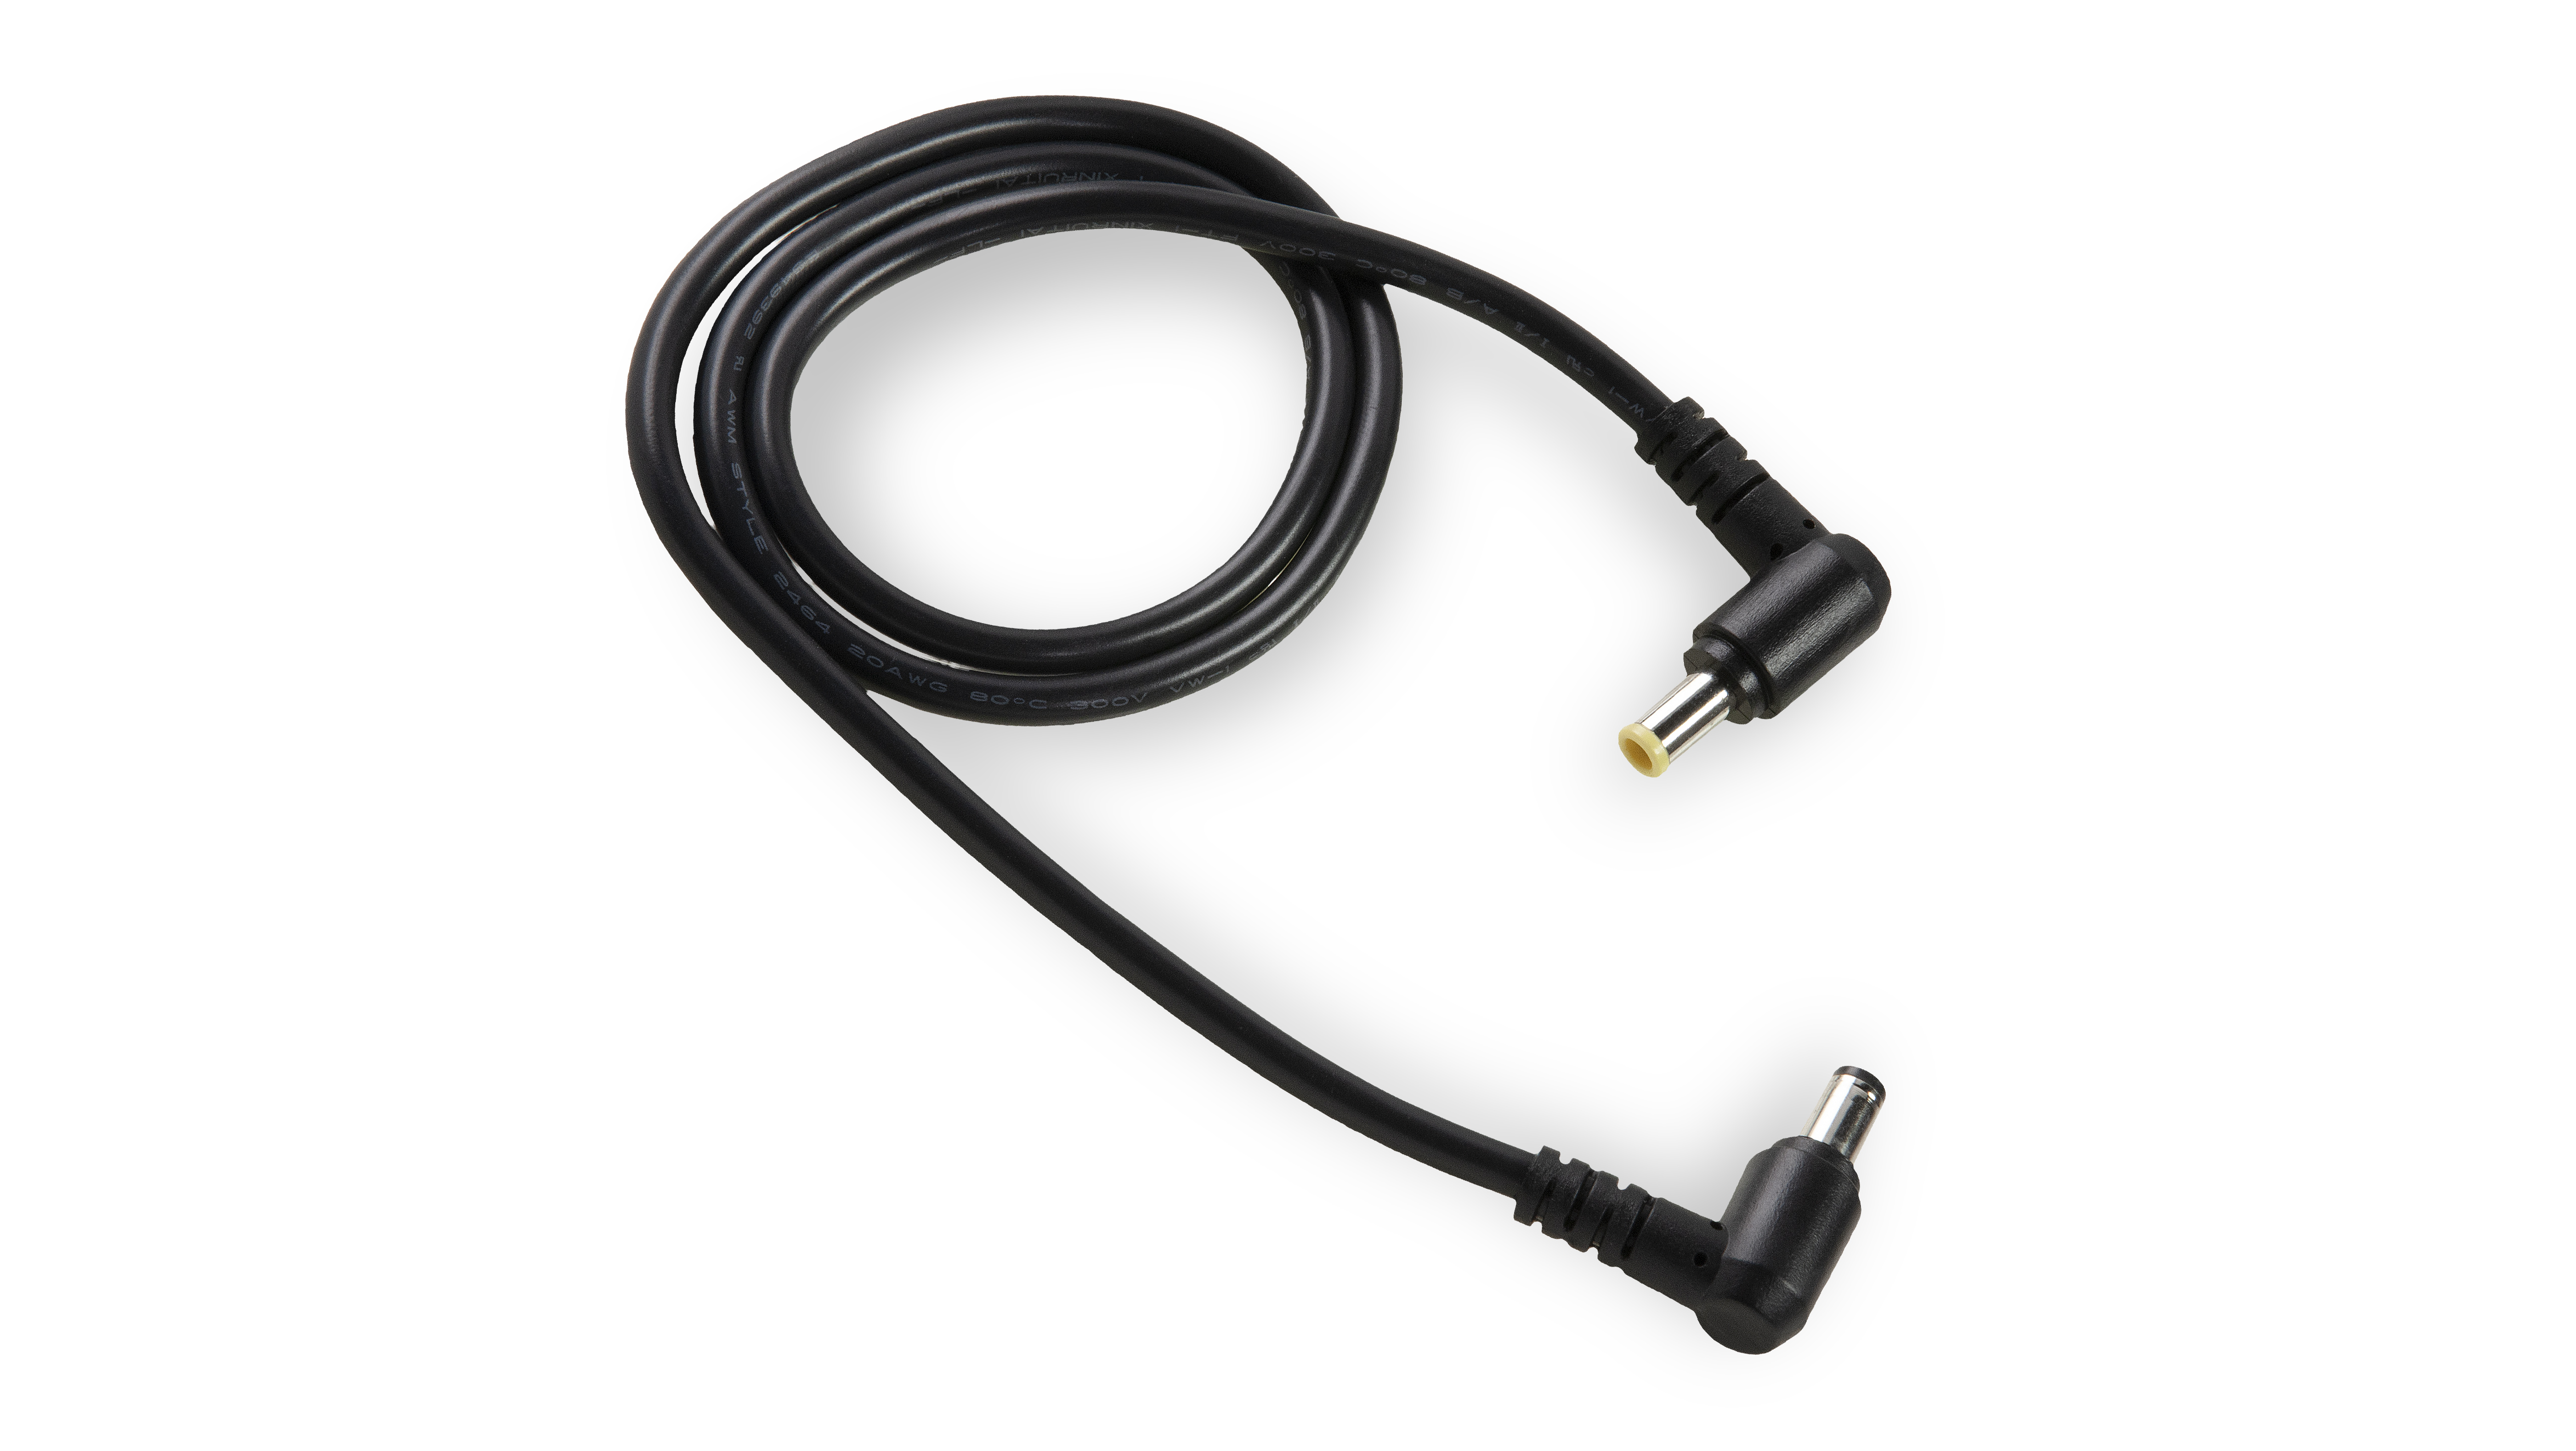 Tilta 12V USB-C to 3.5/1.35mm DC Male Power Cable (40cm)